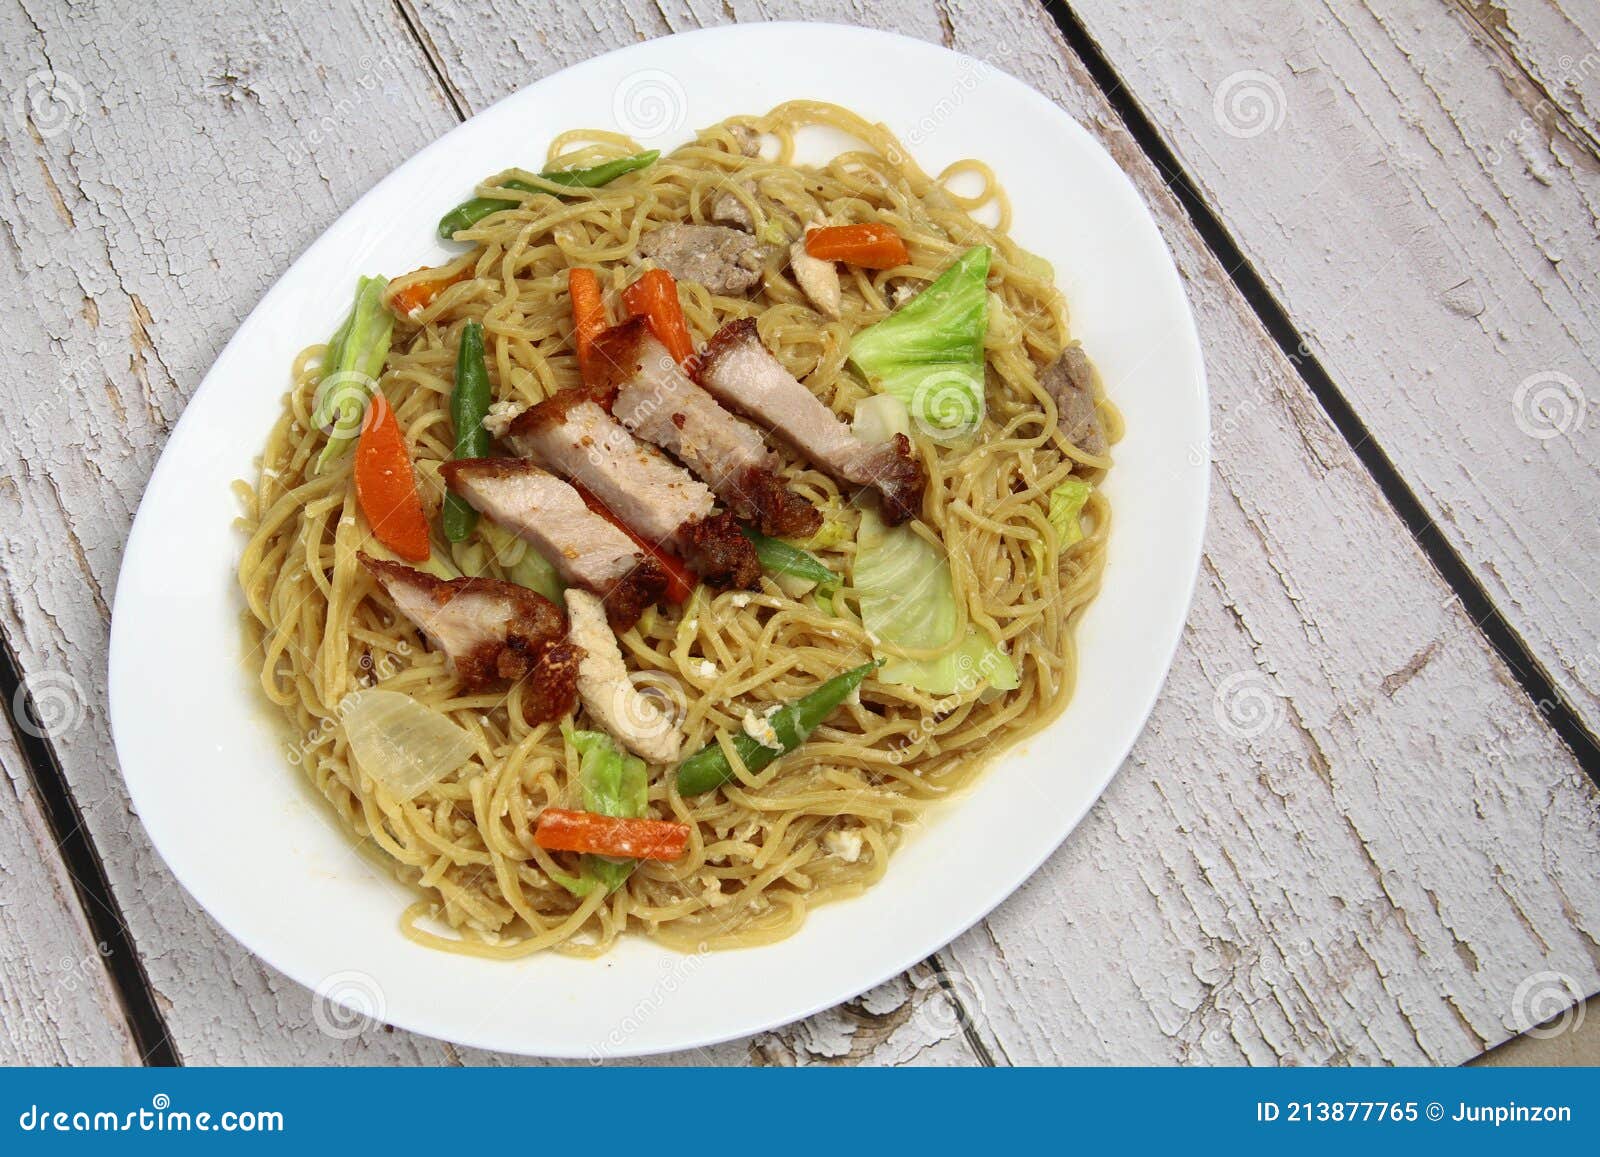 freshly cooked filipino food called pancit canton